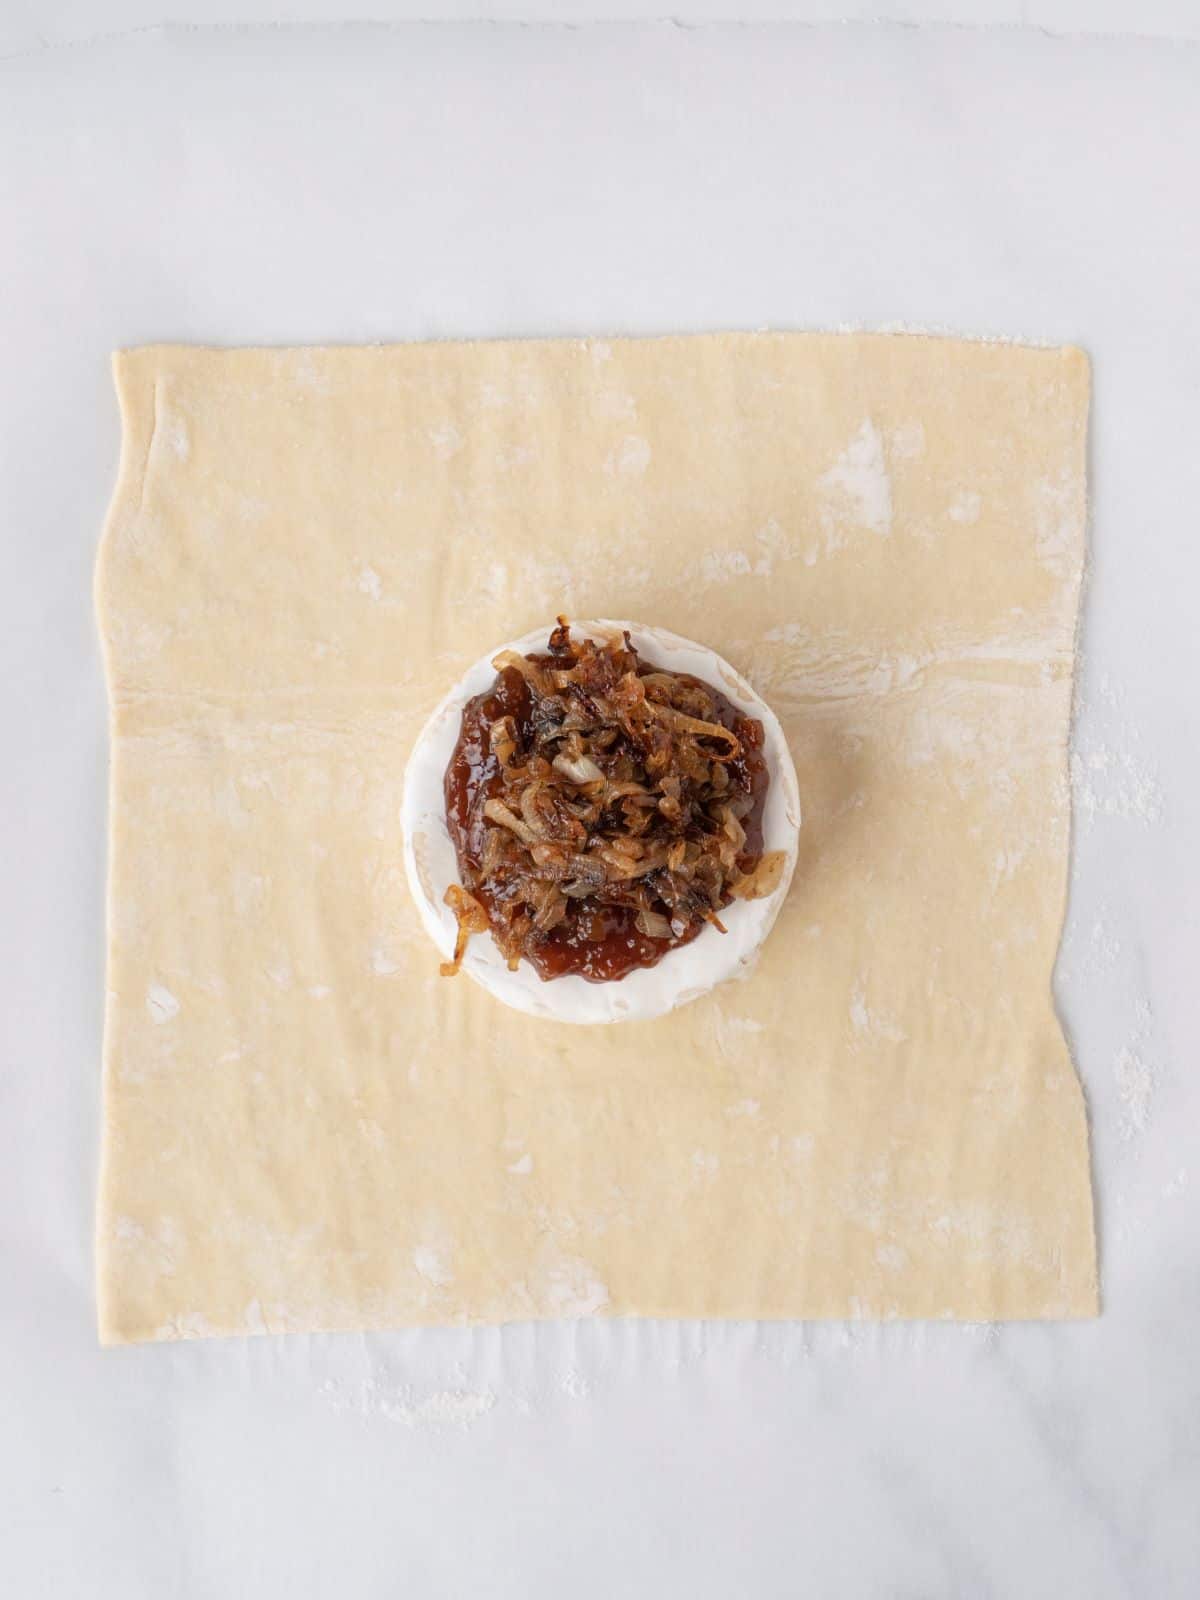 A rolled out puff pastry with a wheel of brie topped with caramelized onion and fig jam in the center.